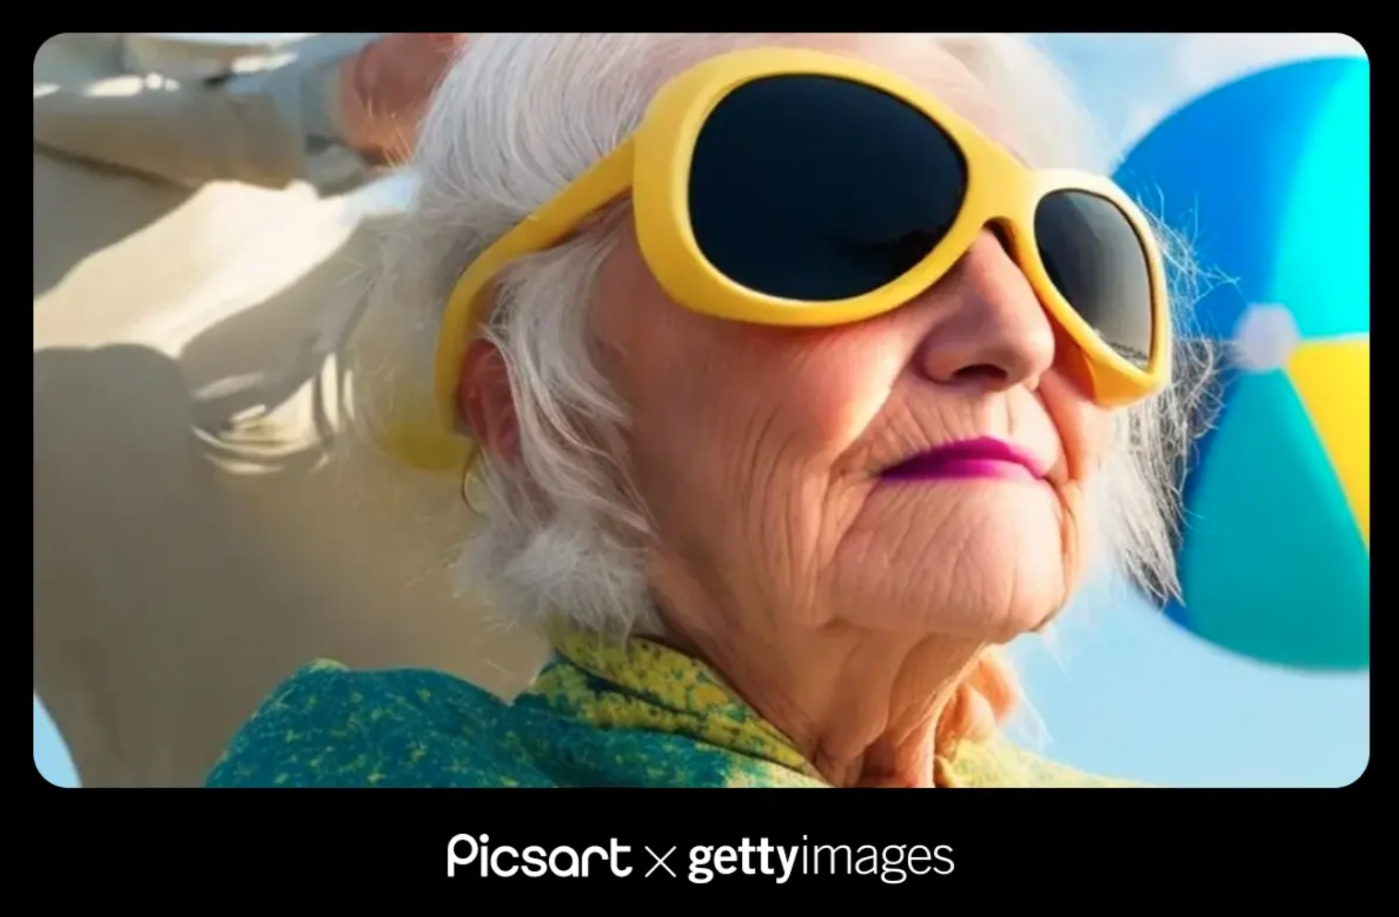 Picsart and Getty are making an AI image generator entirely trained on licensed content